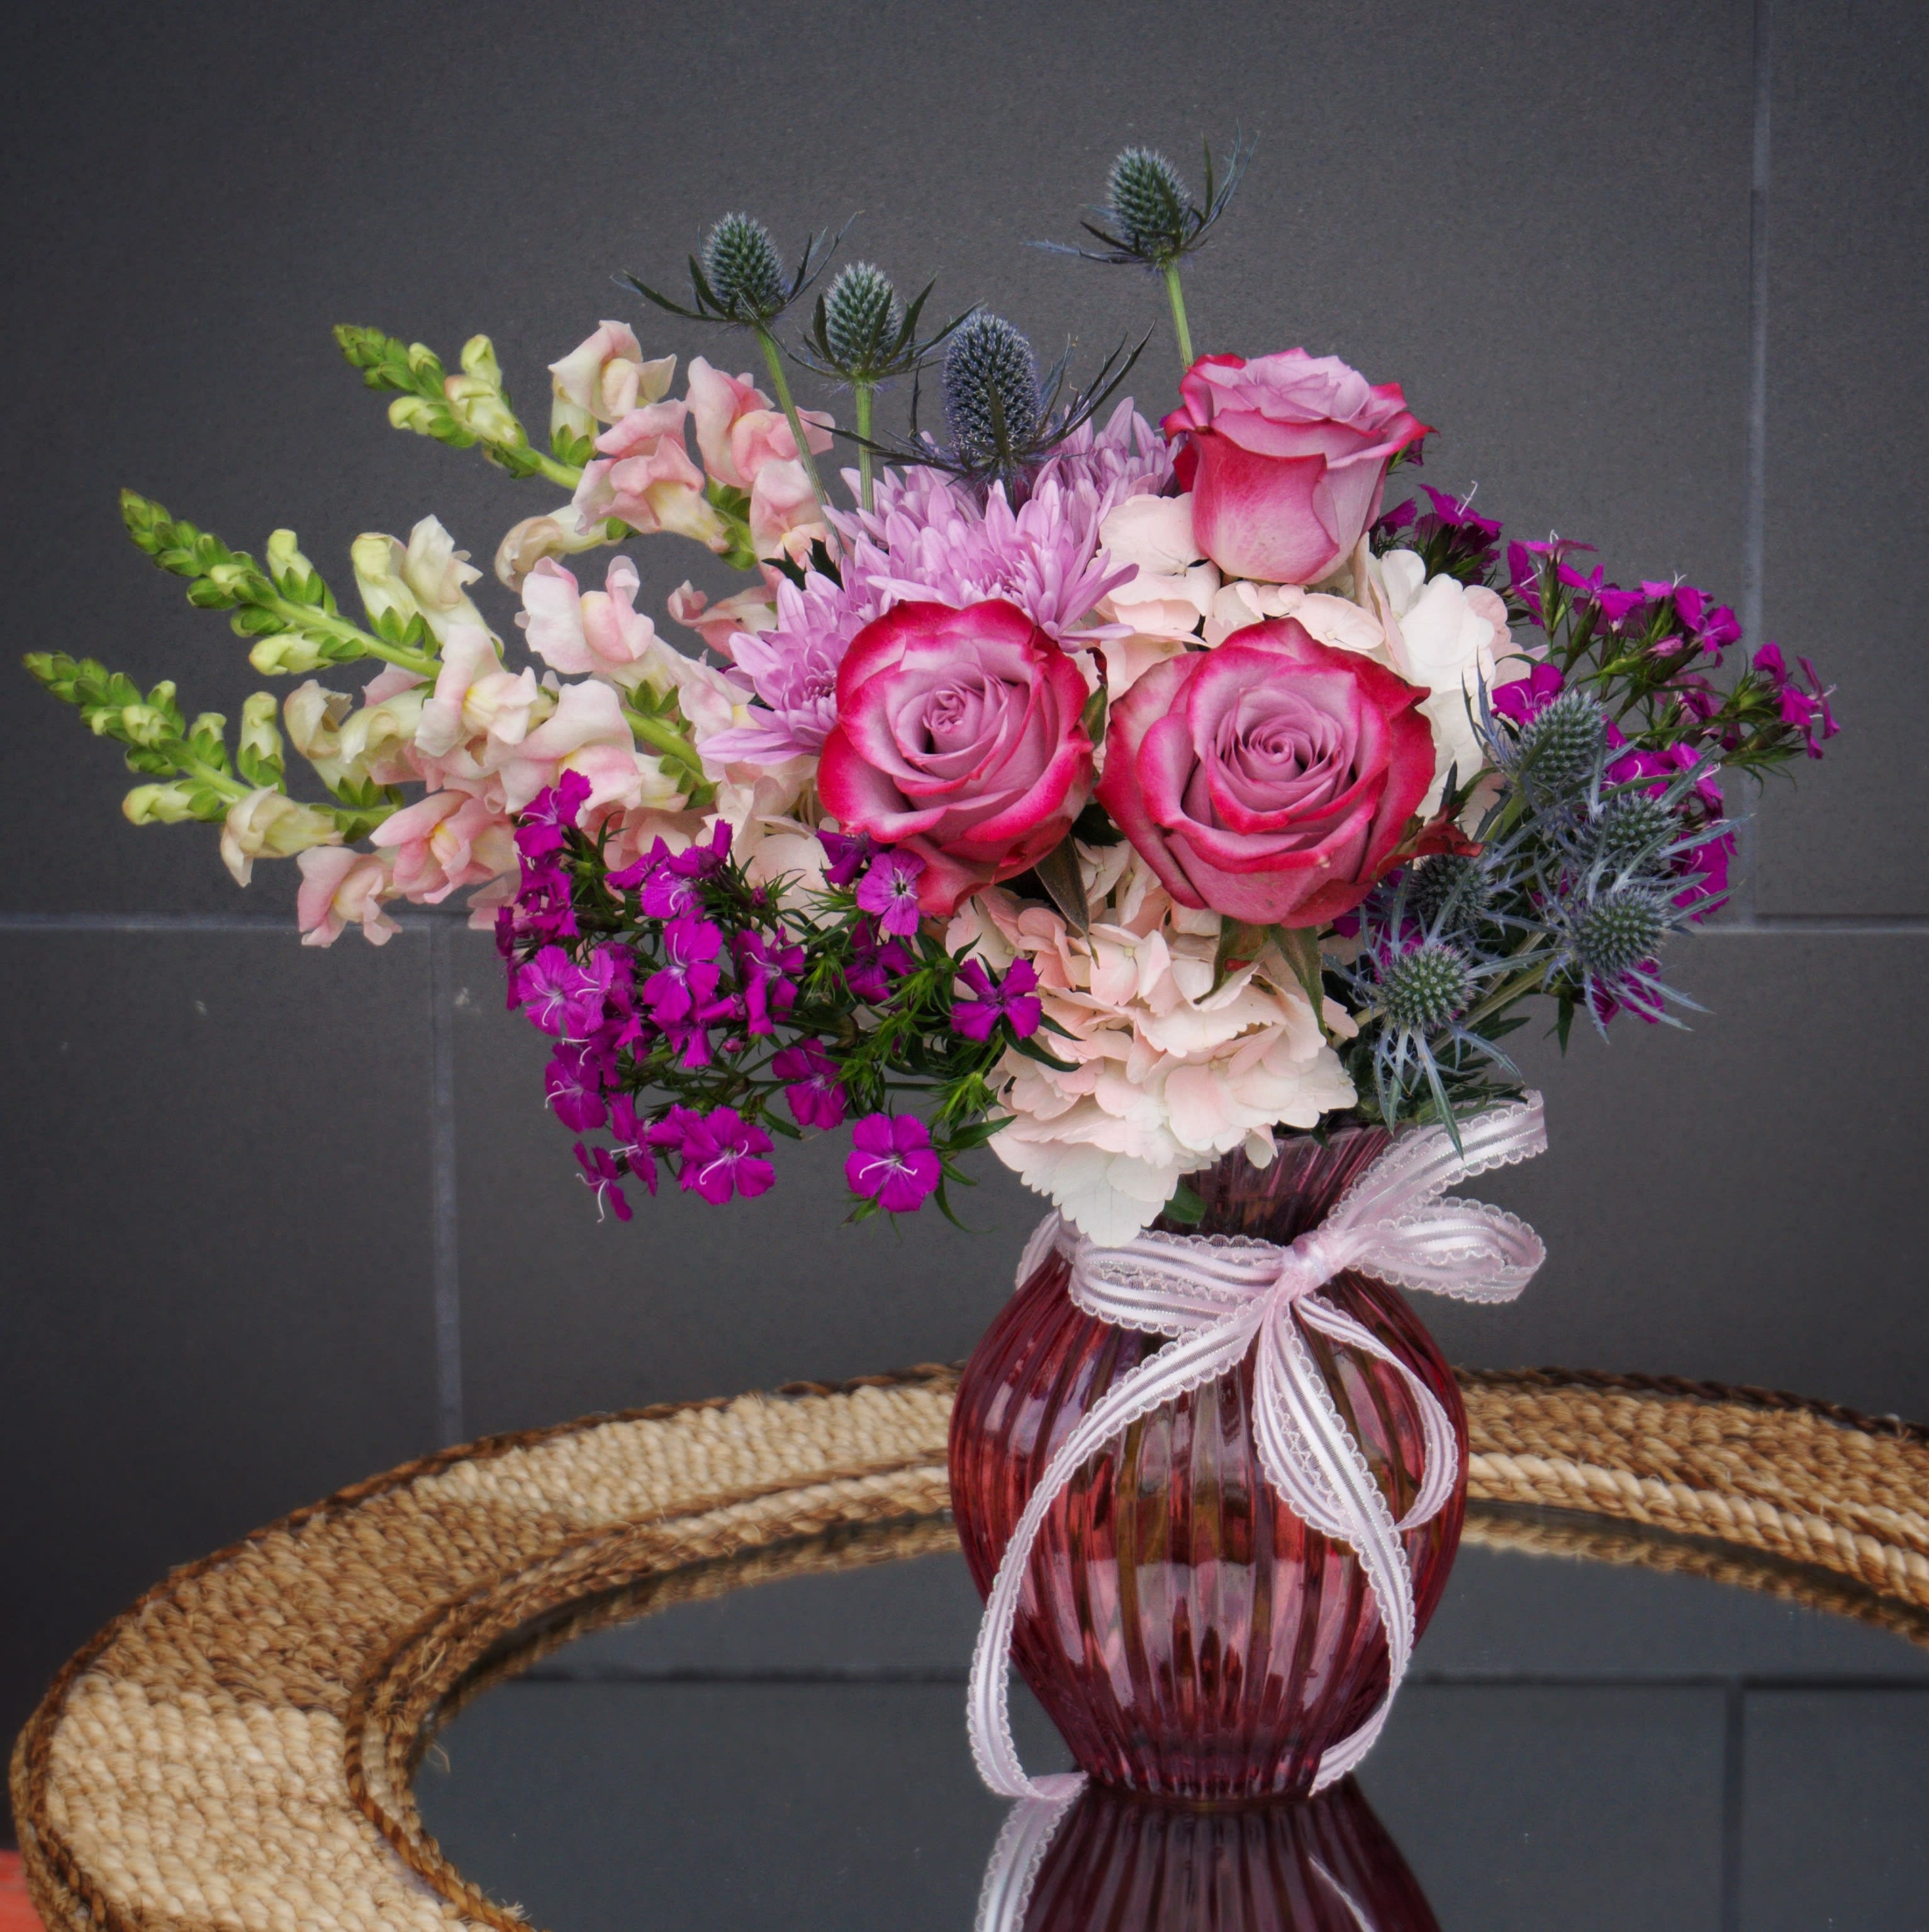 Forever Beautiful - Beautiful design including rose, snapdragon, hydrangea, sweet william and accents in a nice vase. STANDARD: FIRST PHOTO DELUXE: SECOND PHOTO PREMIUM: THIRD PHOTO